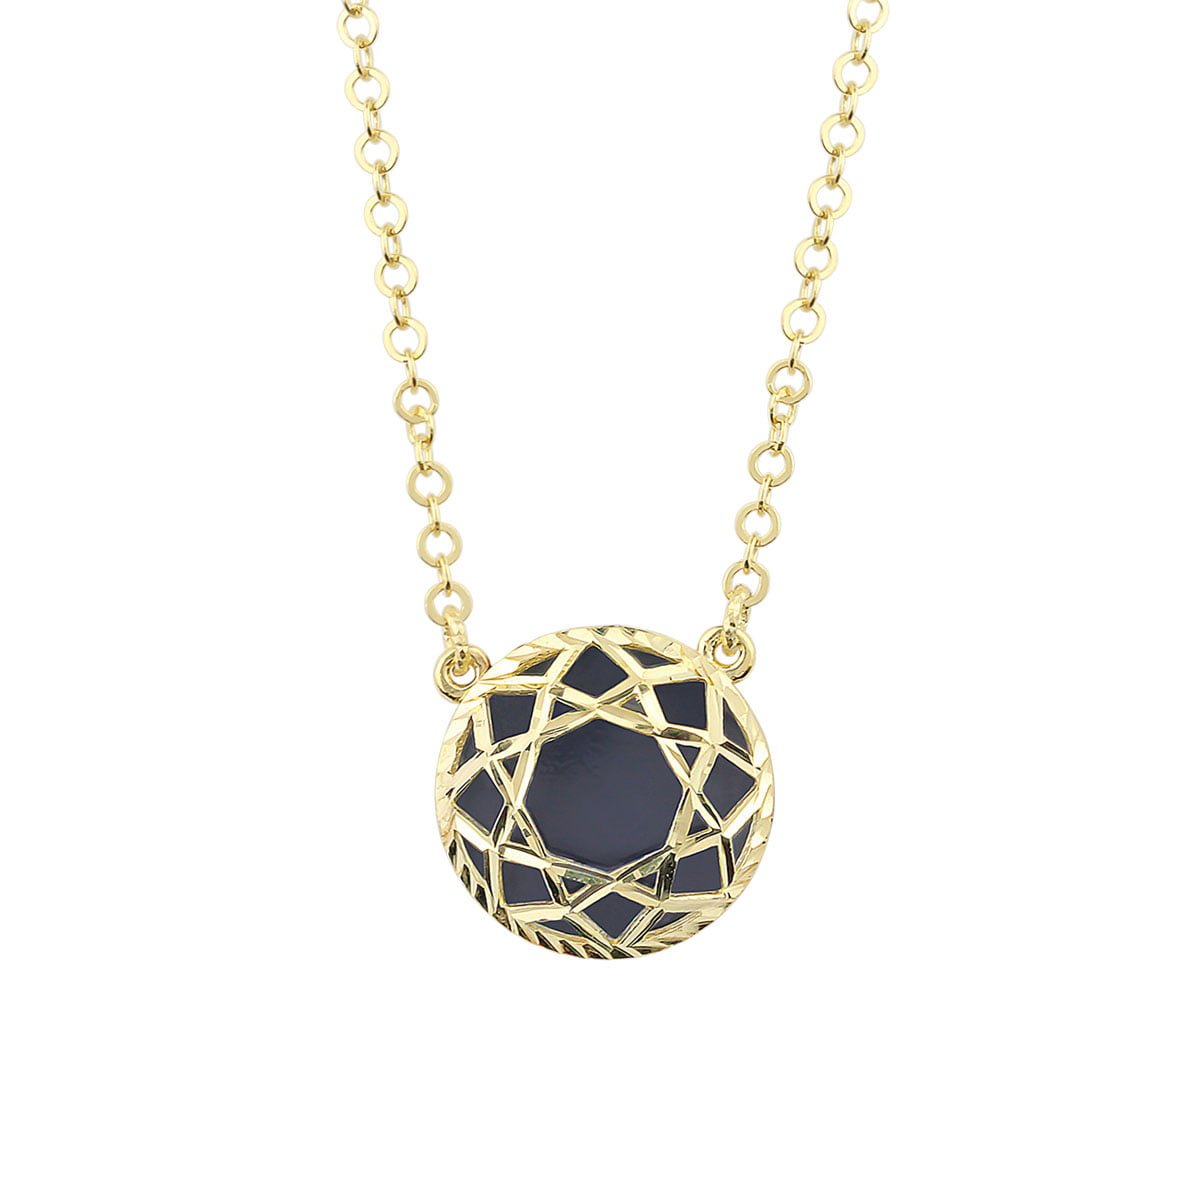 Auric Zoey 18ct Gold Pendant Necklace